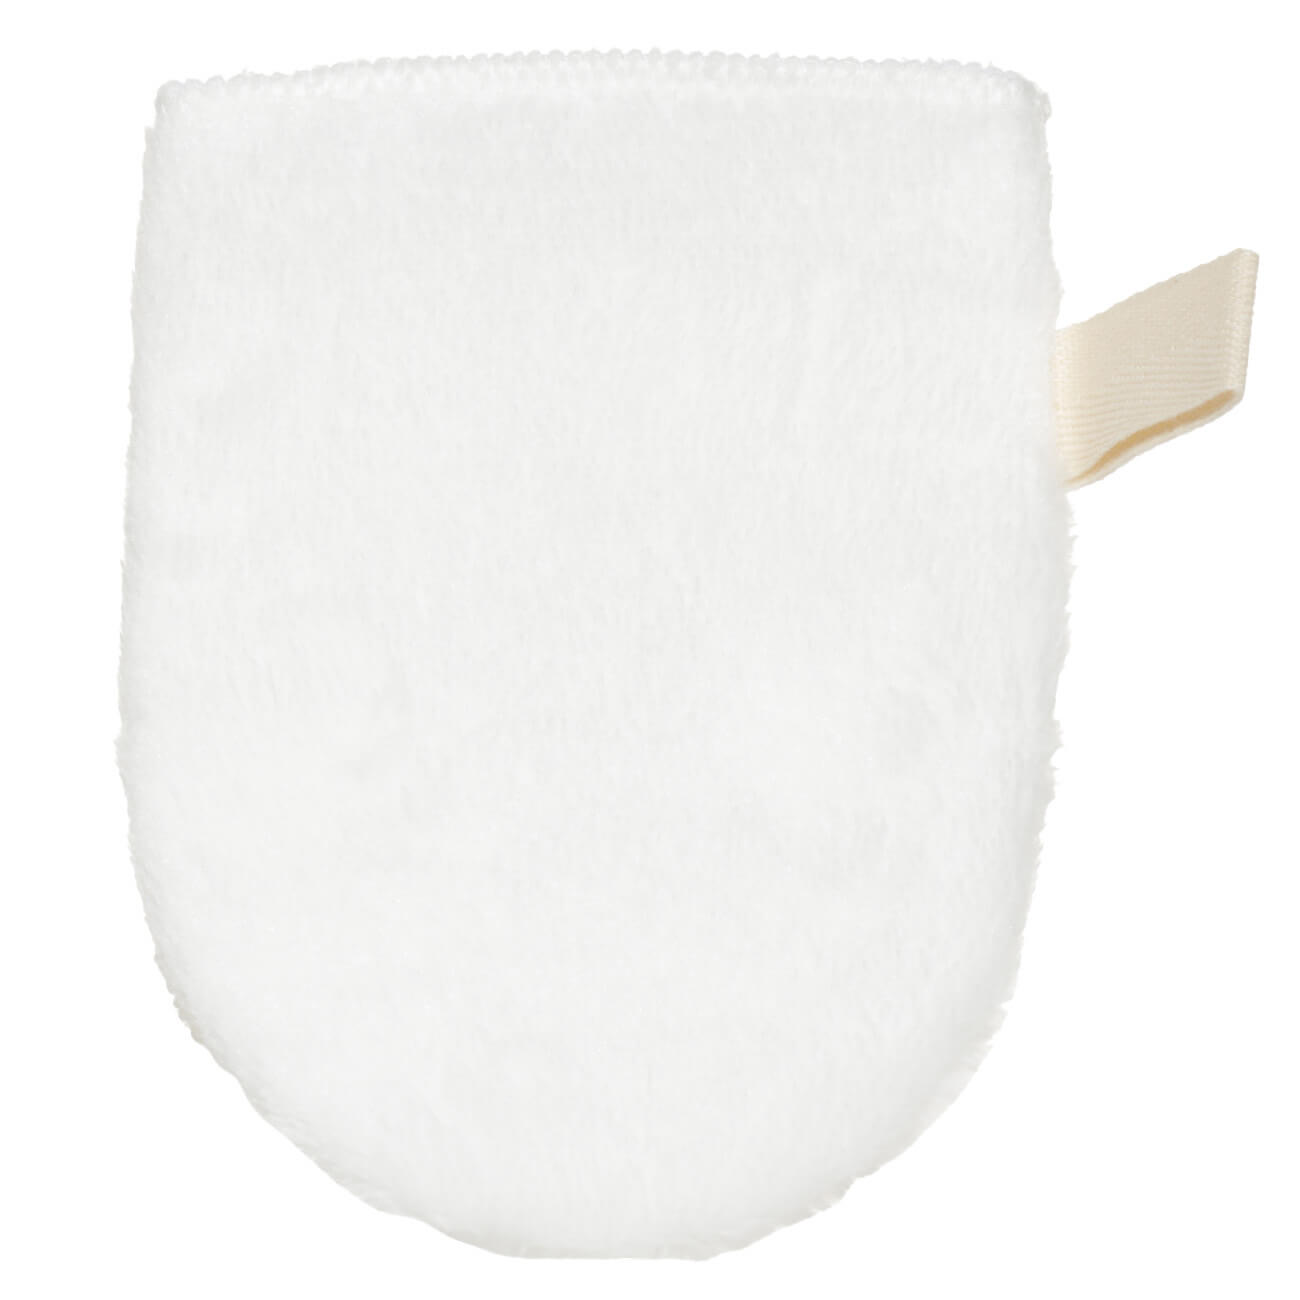 Face wash mitten, 12x9 cm, double-sided, polyester, milk, Unique spa изображение № 1